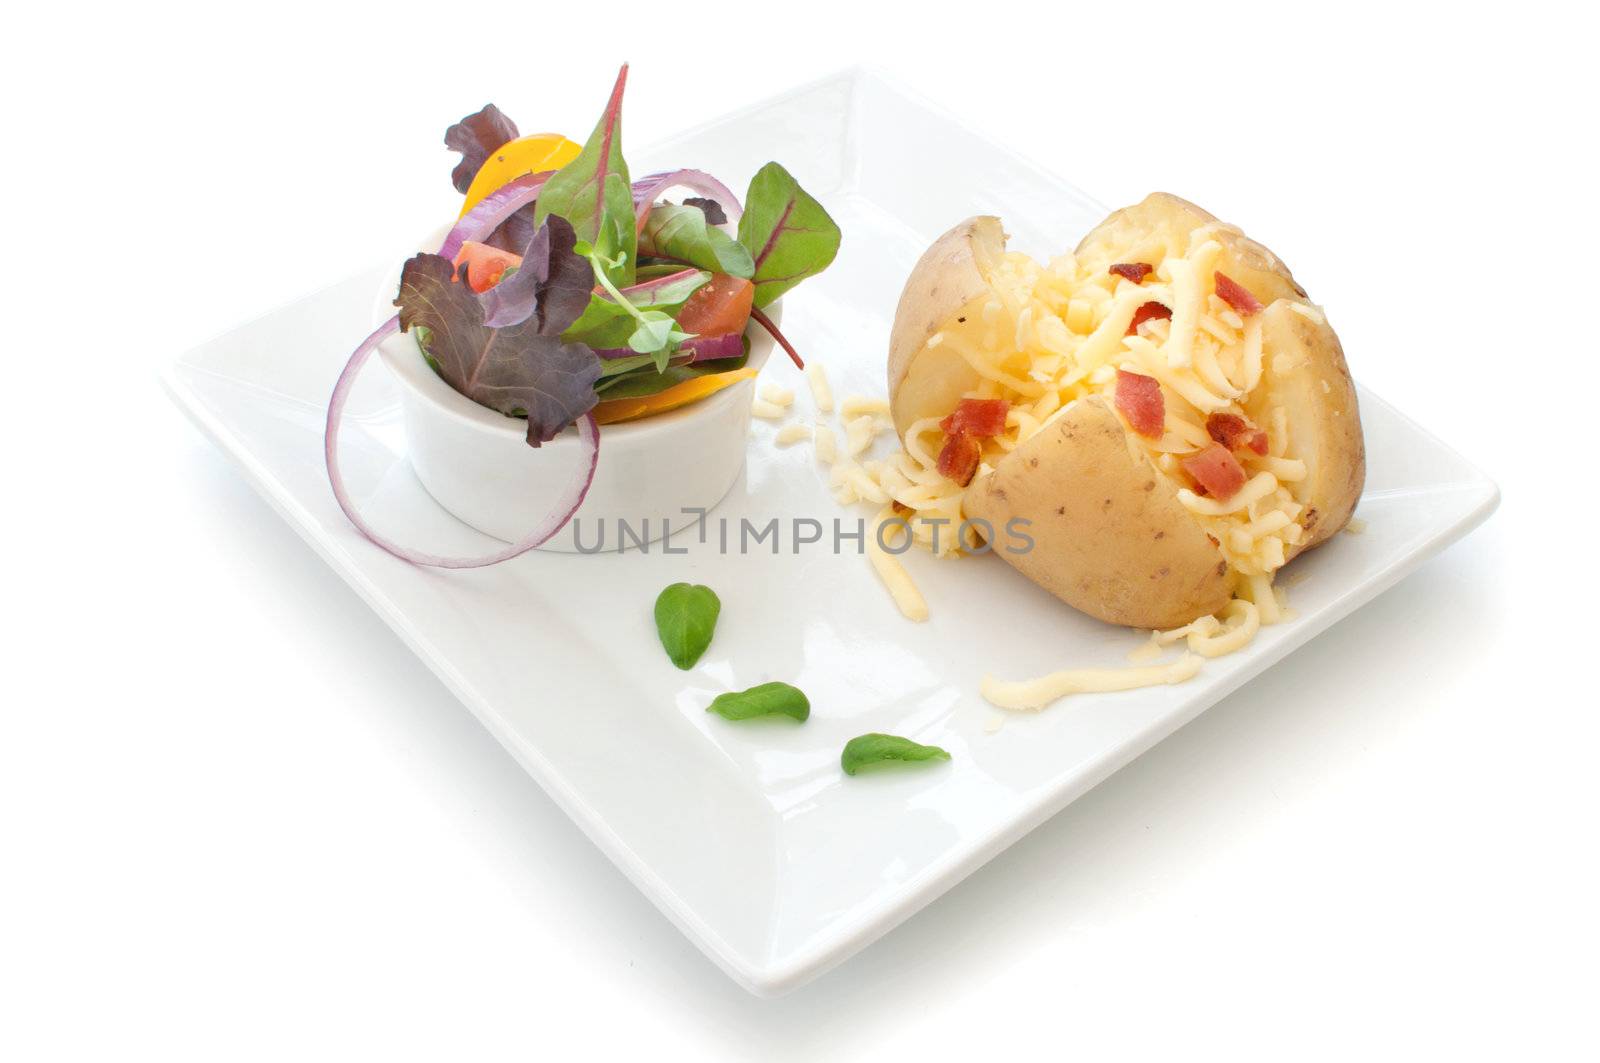 Grated cheese and bacon pieces with baked potato over a white background